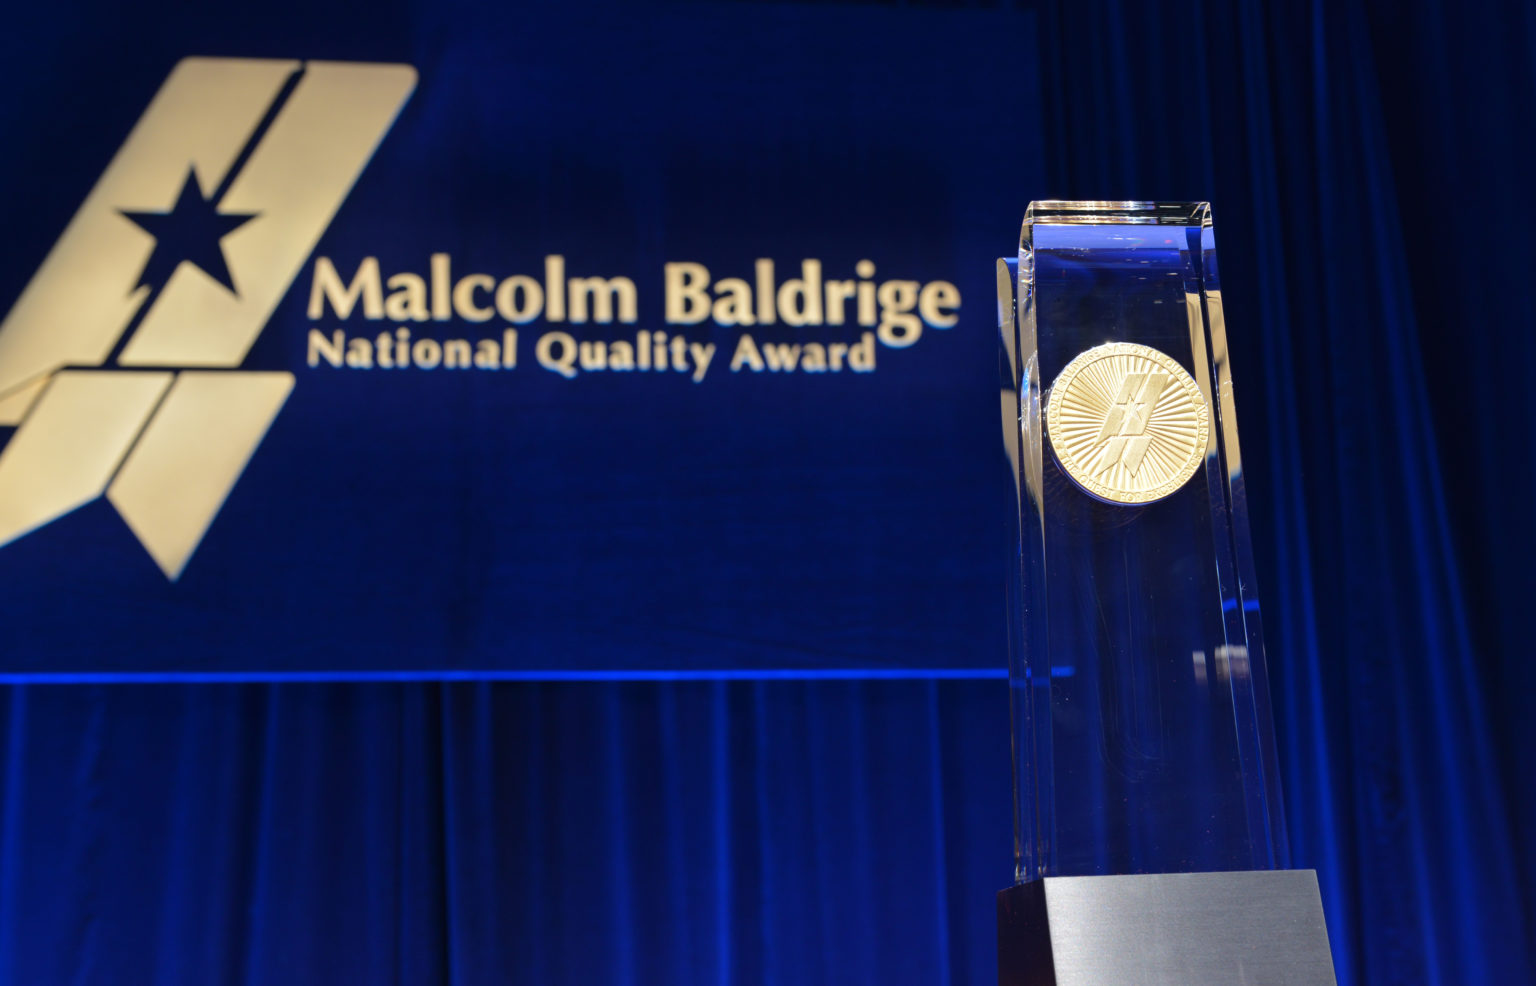 What is the Malcolm Baldrige National Quality Award®?